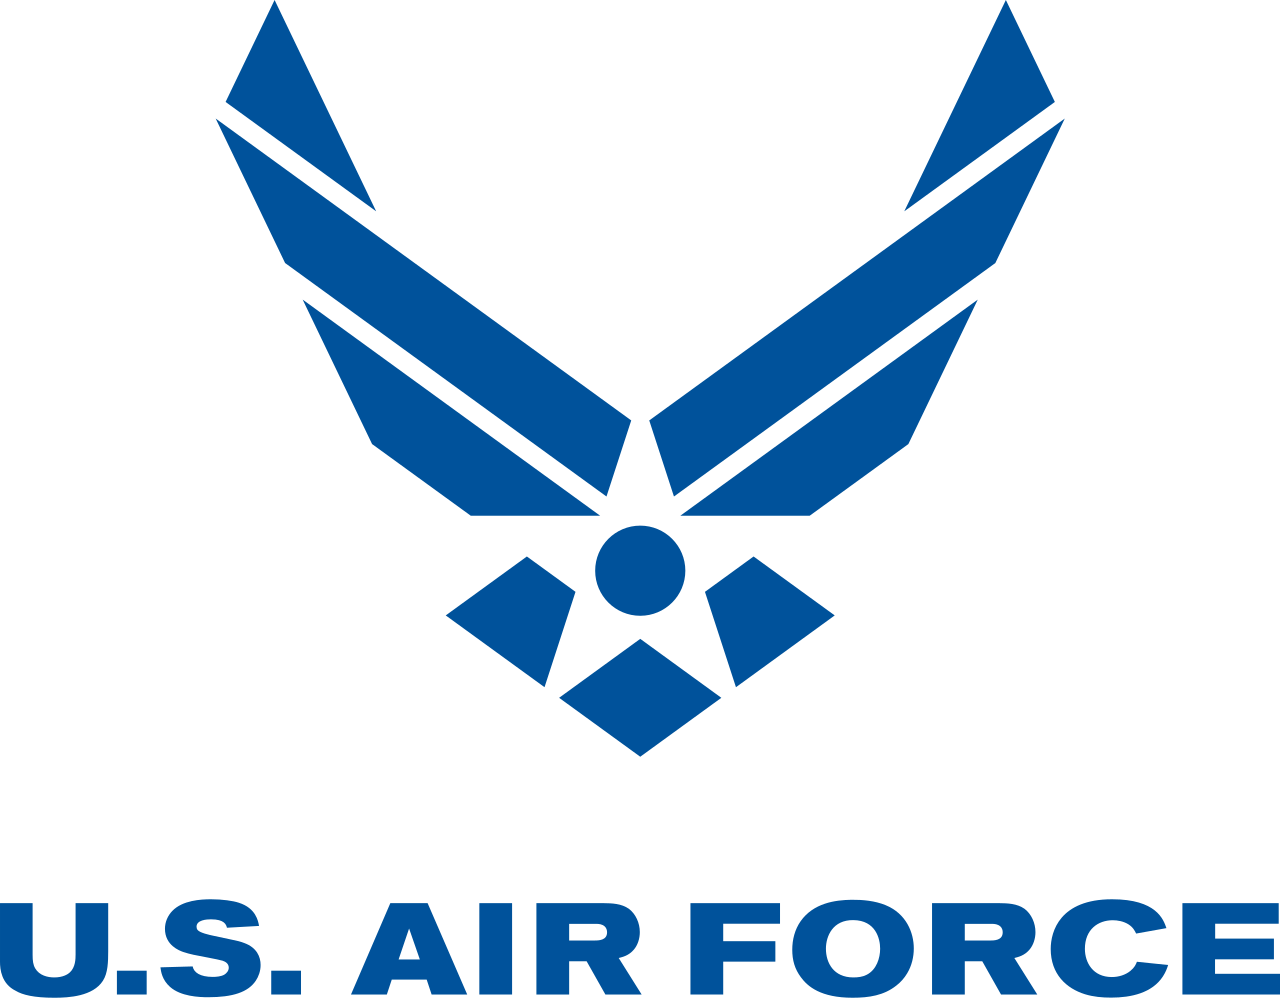 United States Air Force logo dark blue on a transparent background.